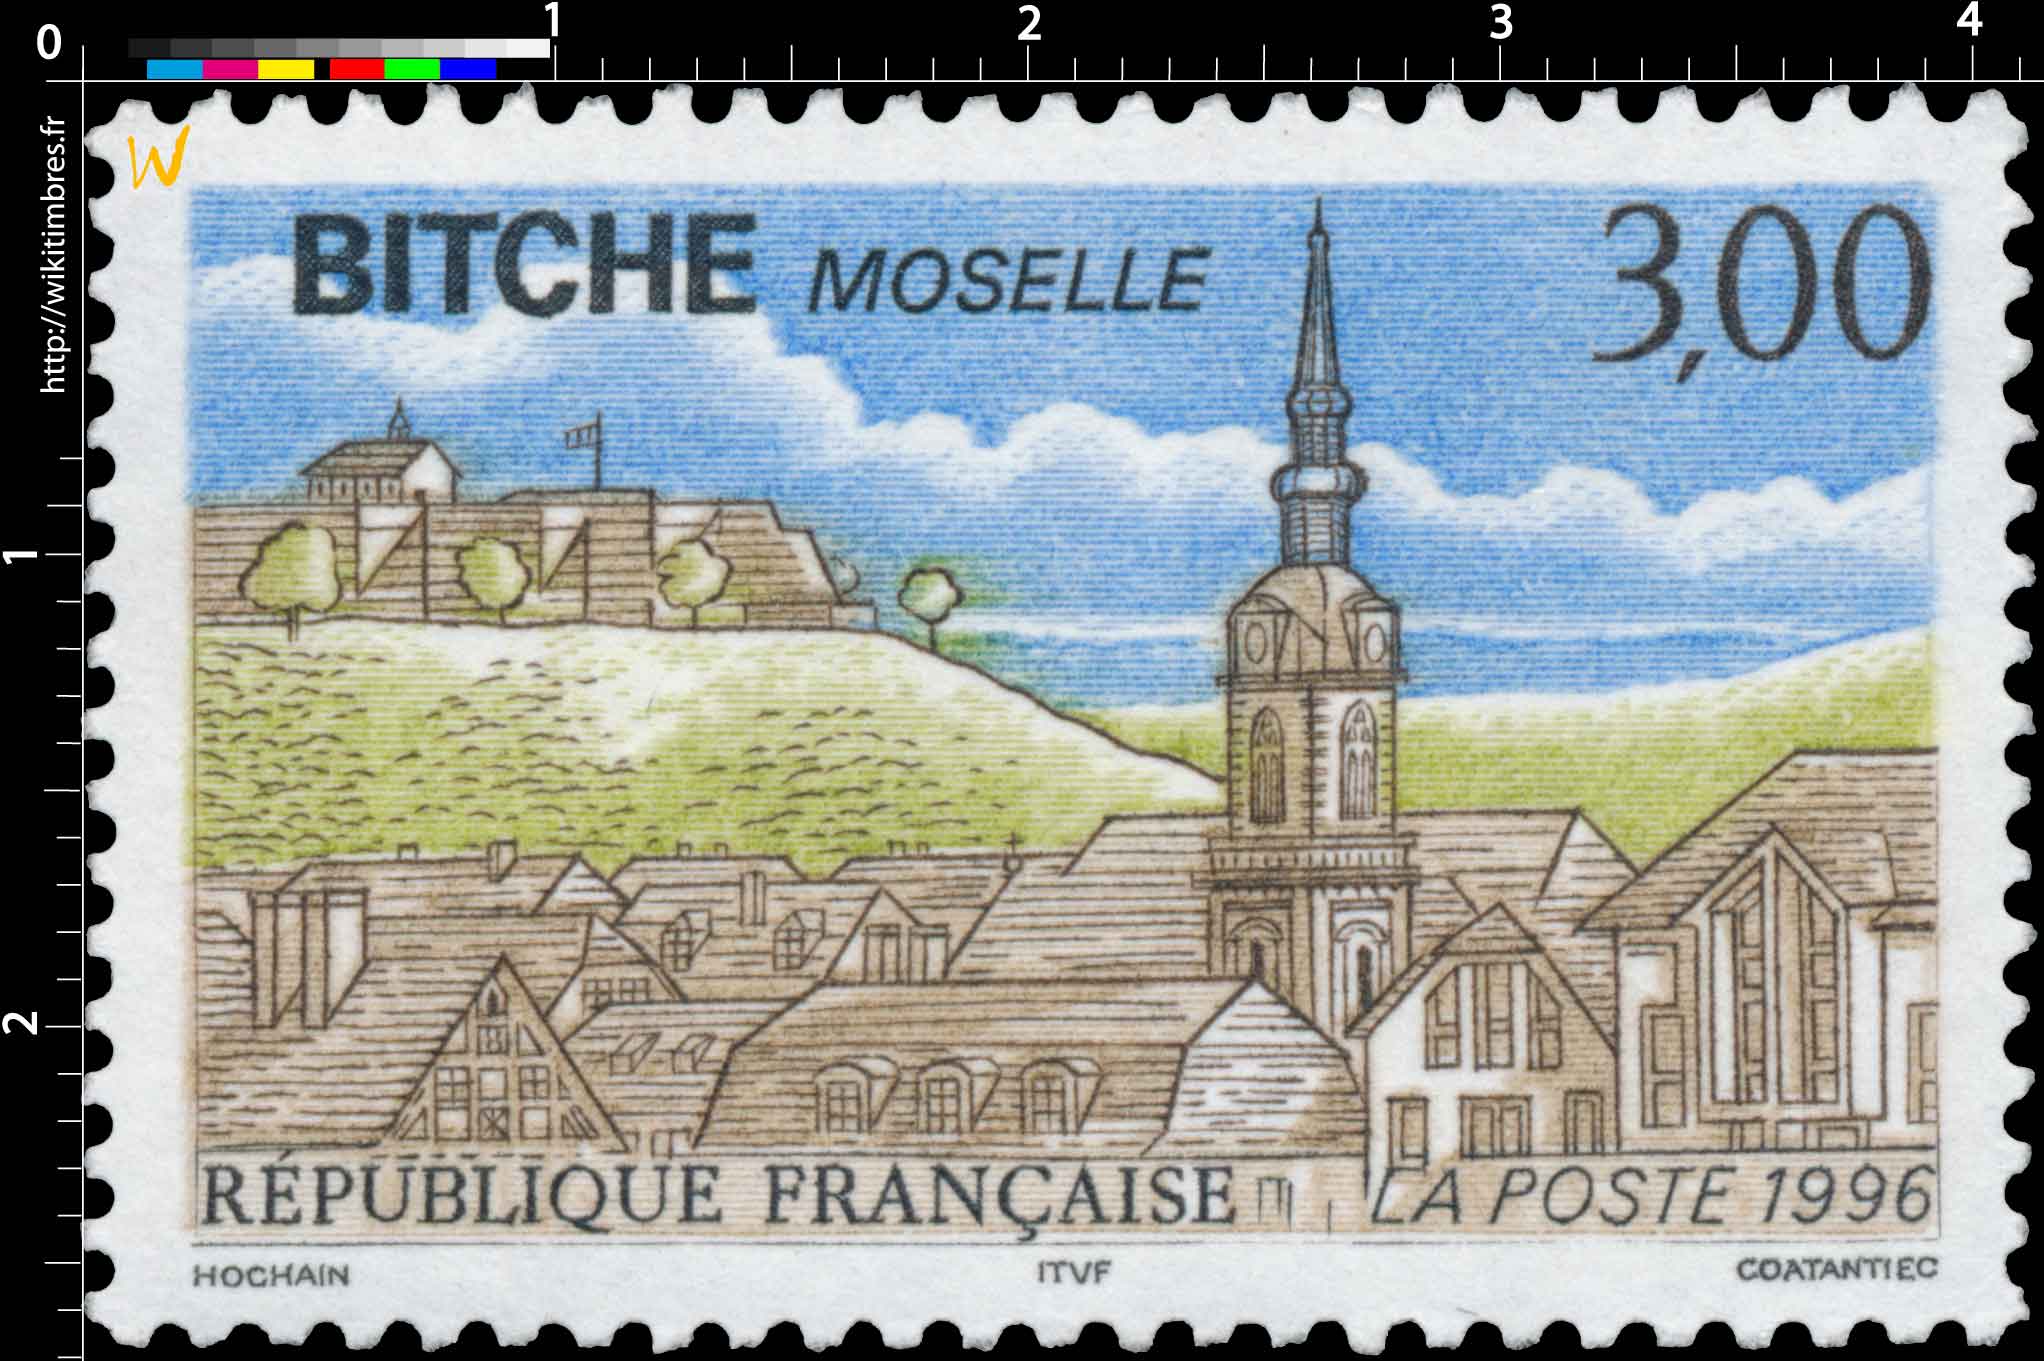 1996 BITCHE MOSELLE